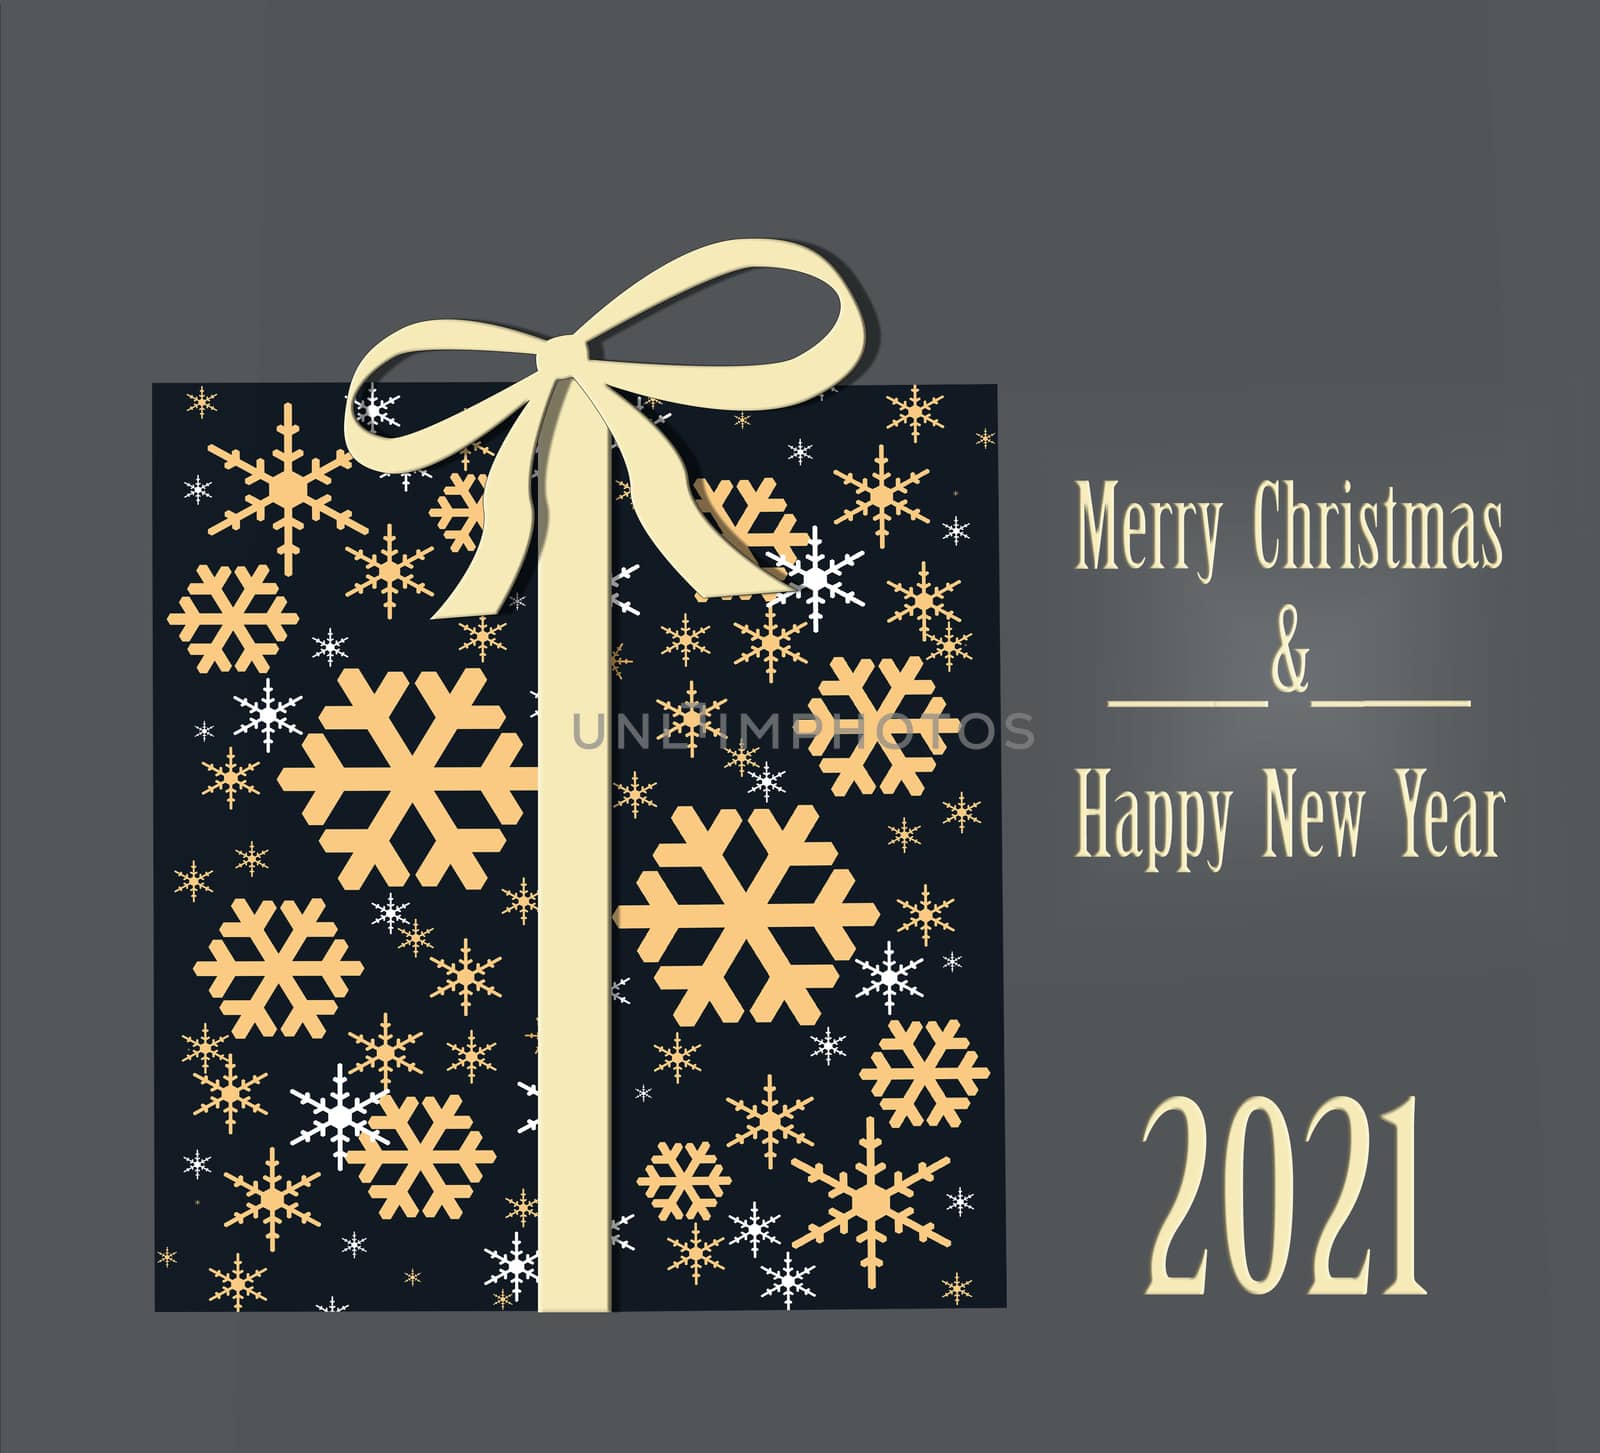 Greeting card concept with the words Merry Christmas and Happy New Year 2021. by NelliPolk